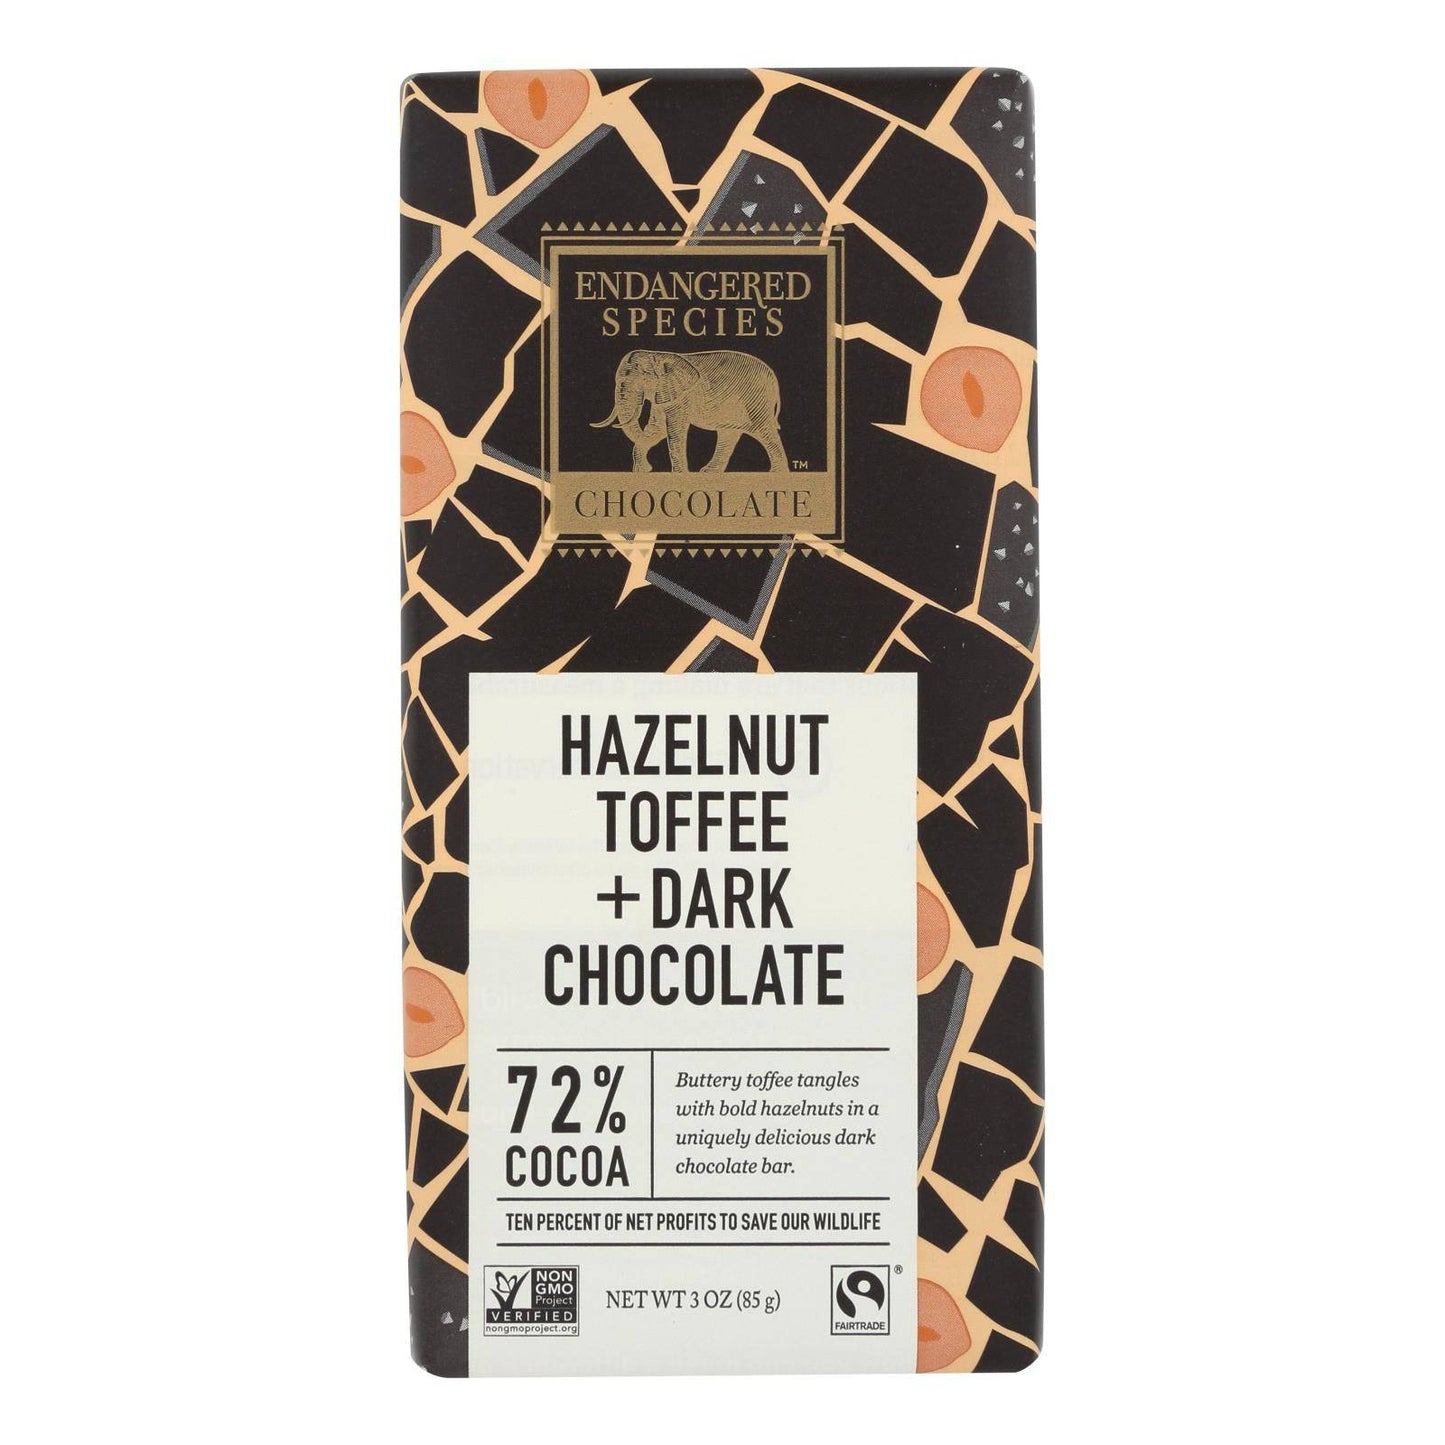 Buy Endangered Species Natural Chocolate Bars - Dark Chocolate - 72 Percent Cocoa - Hazelnut Toffee - 3 Oz Bars - Case Of 12  at OnlyNaturals.us